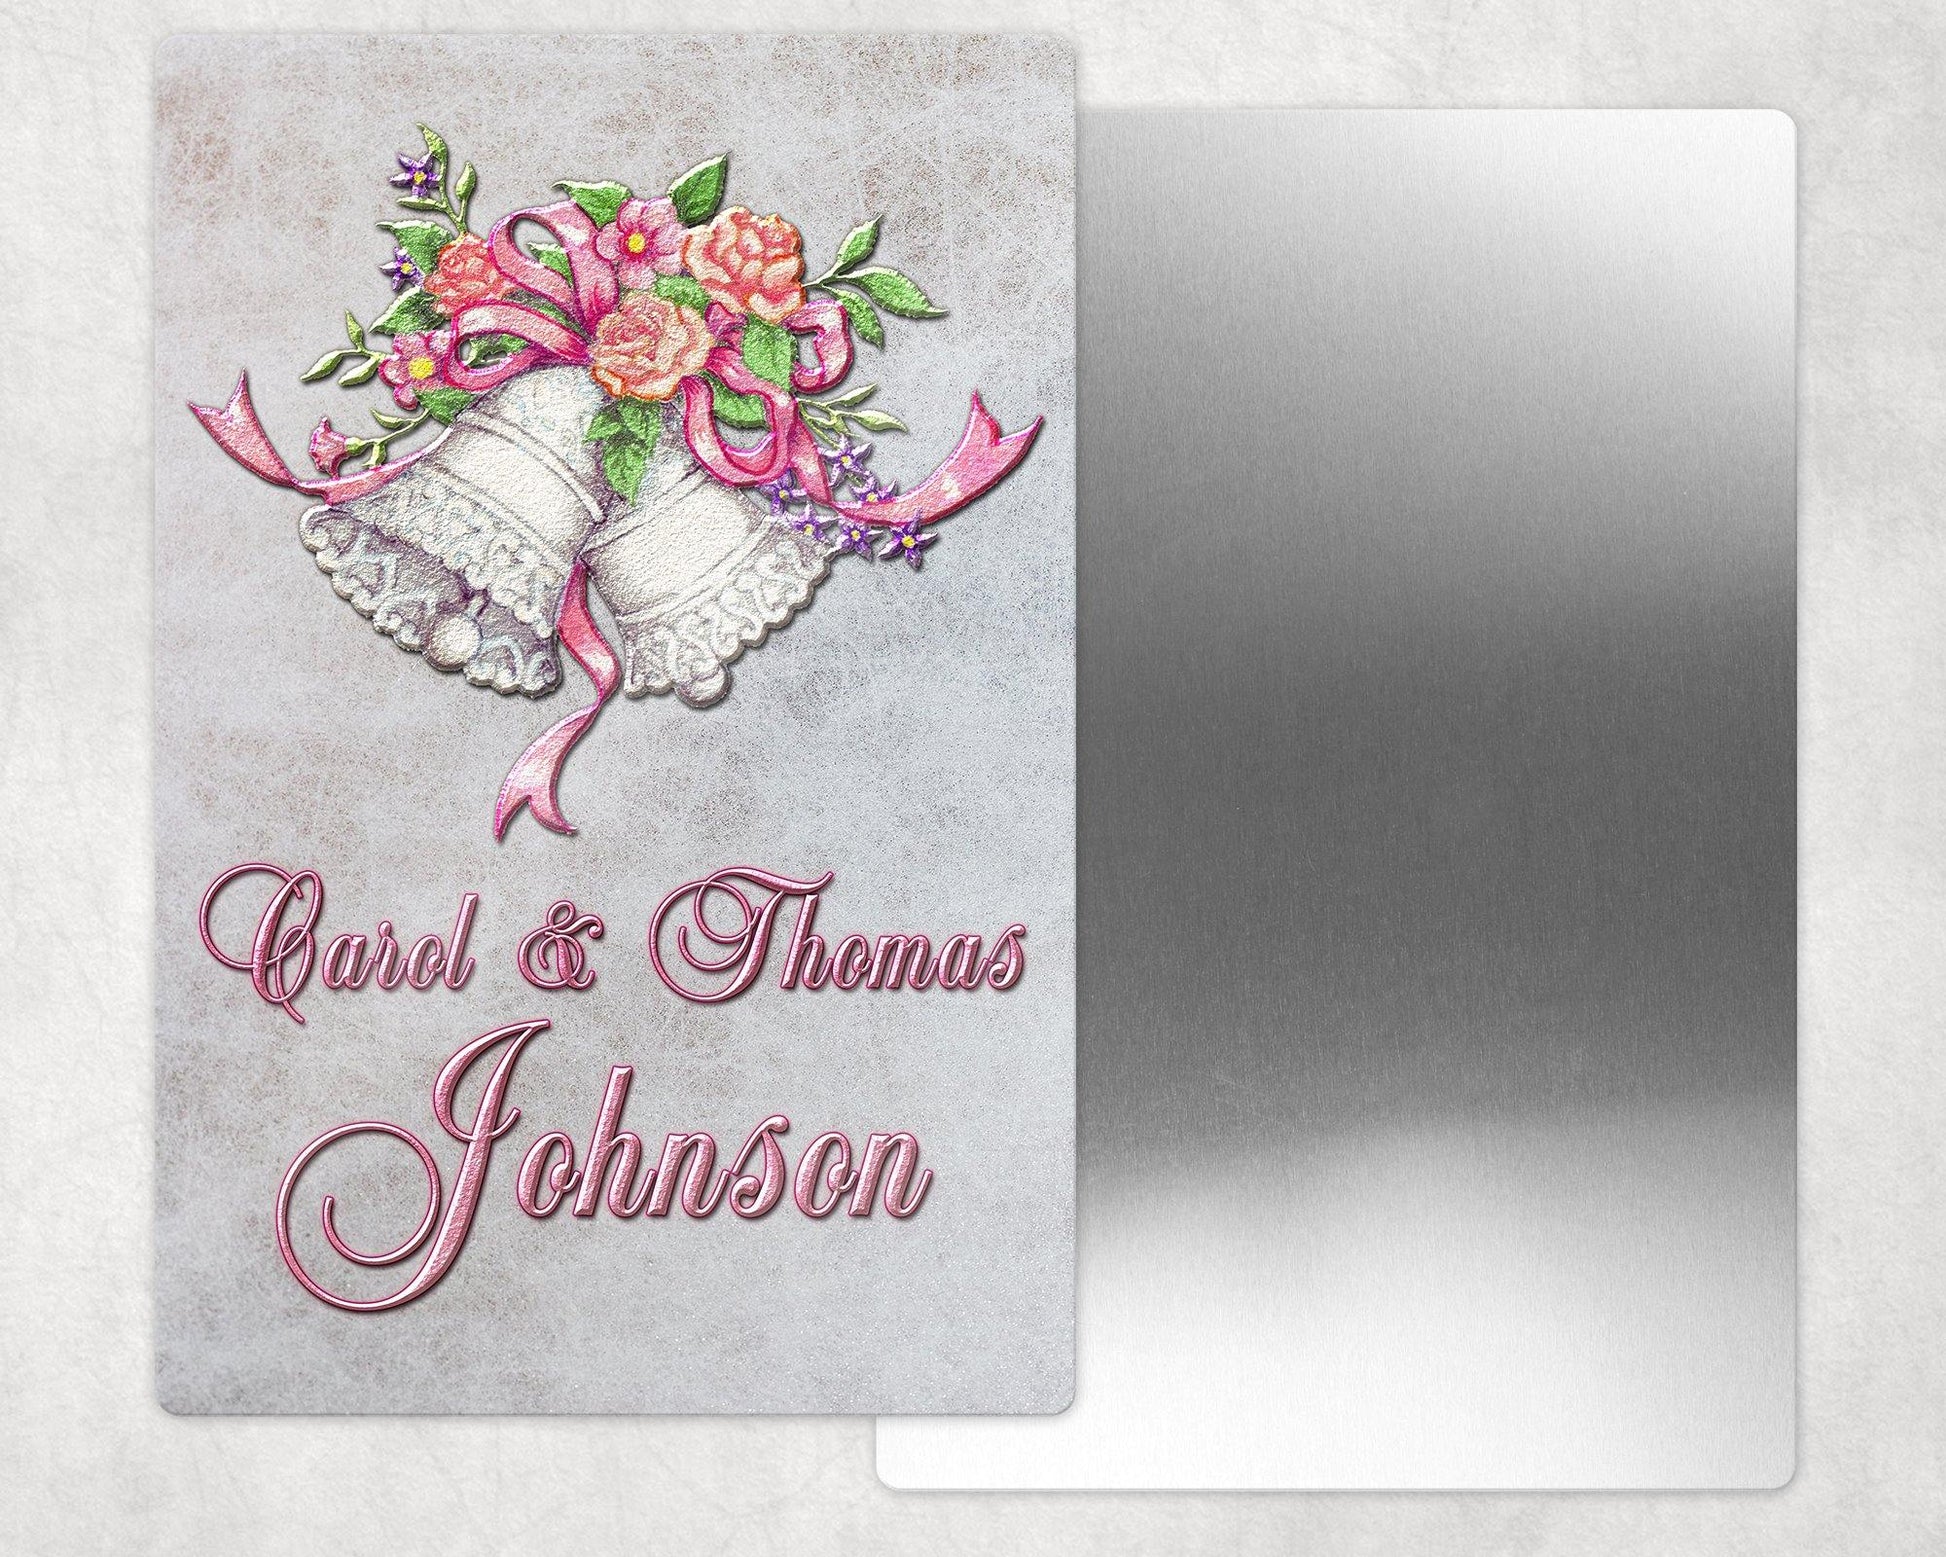 Personalized Wedding/Anniversary Bells - Metal Photo Panel - 8x12 or 12x18 - Schoppix Gifts